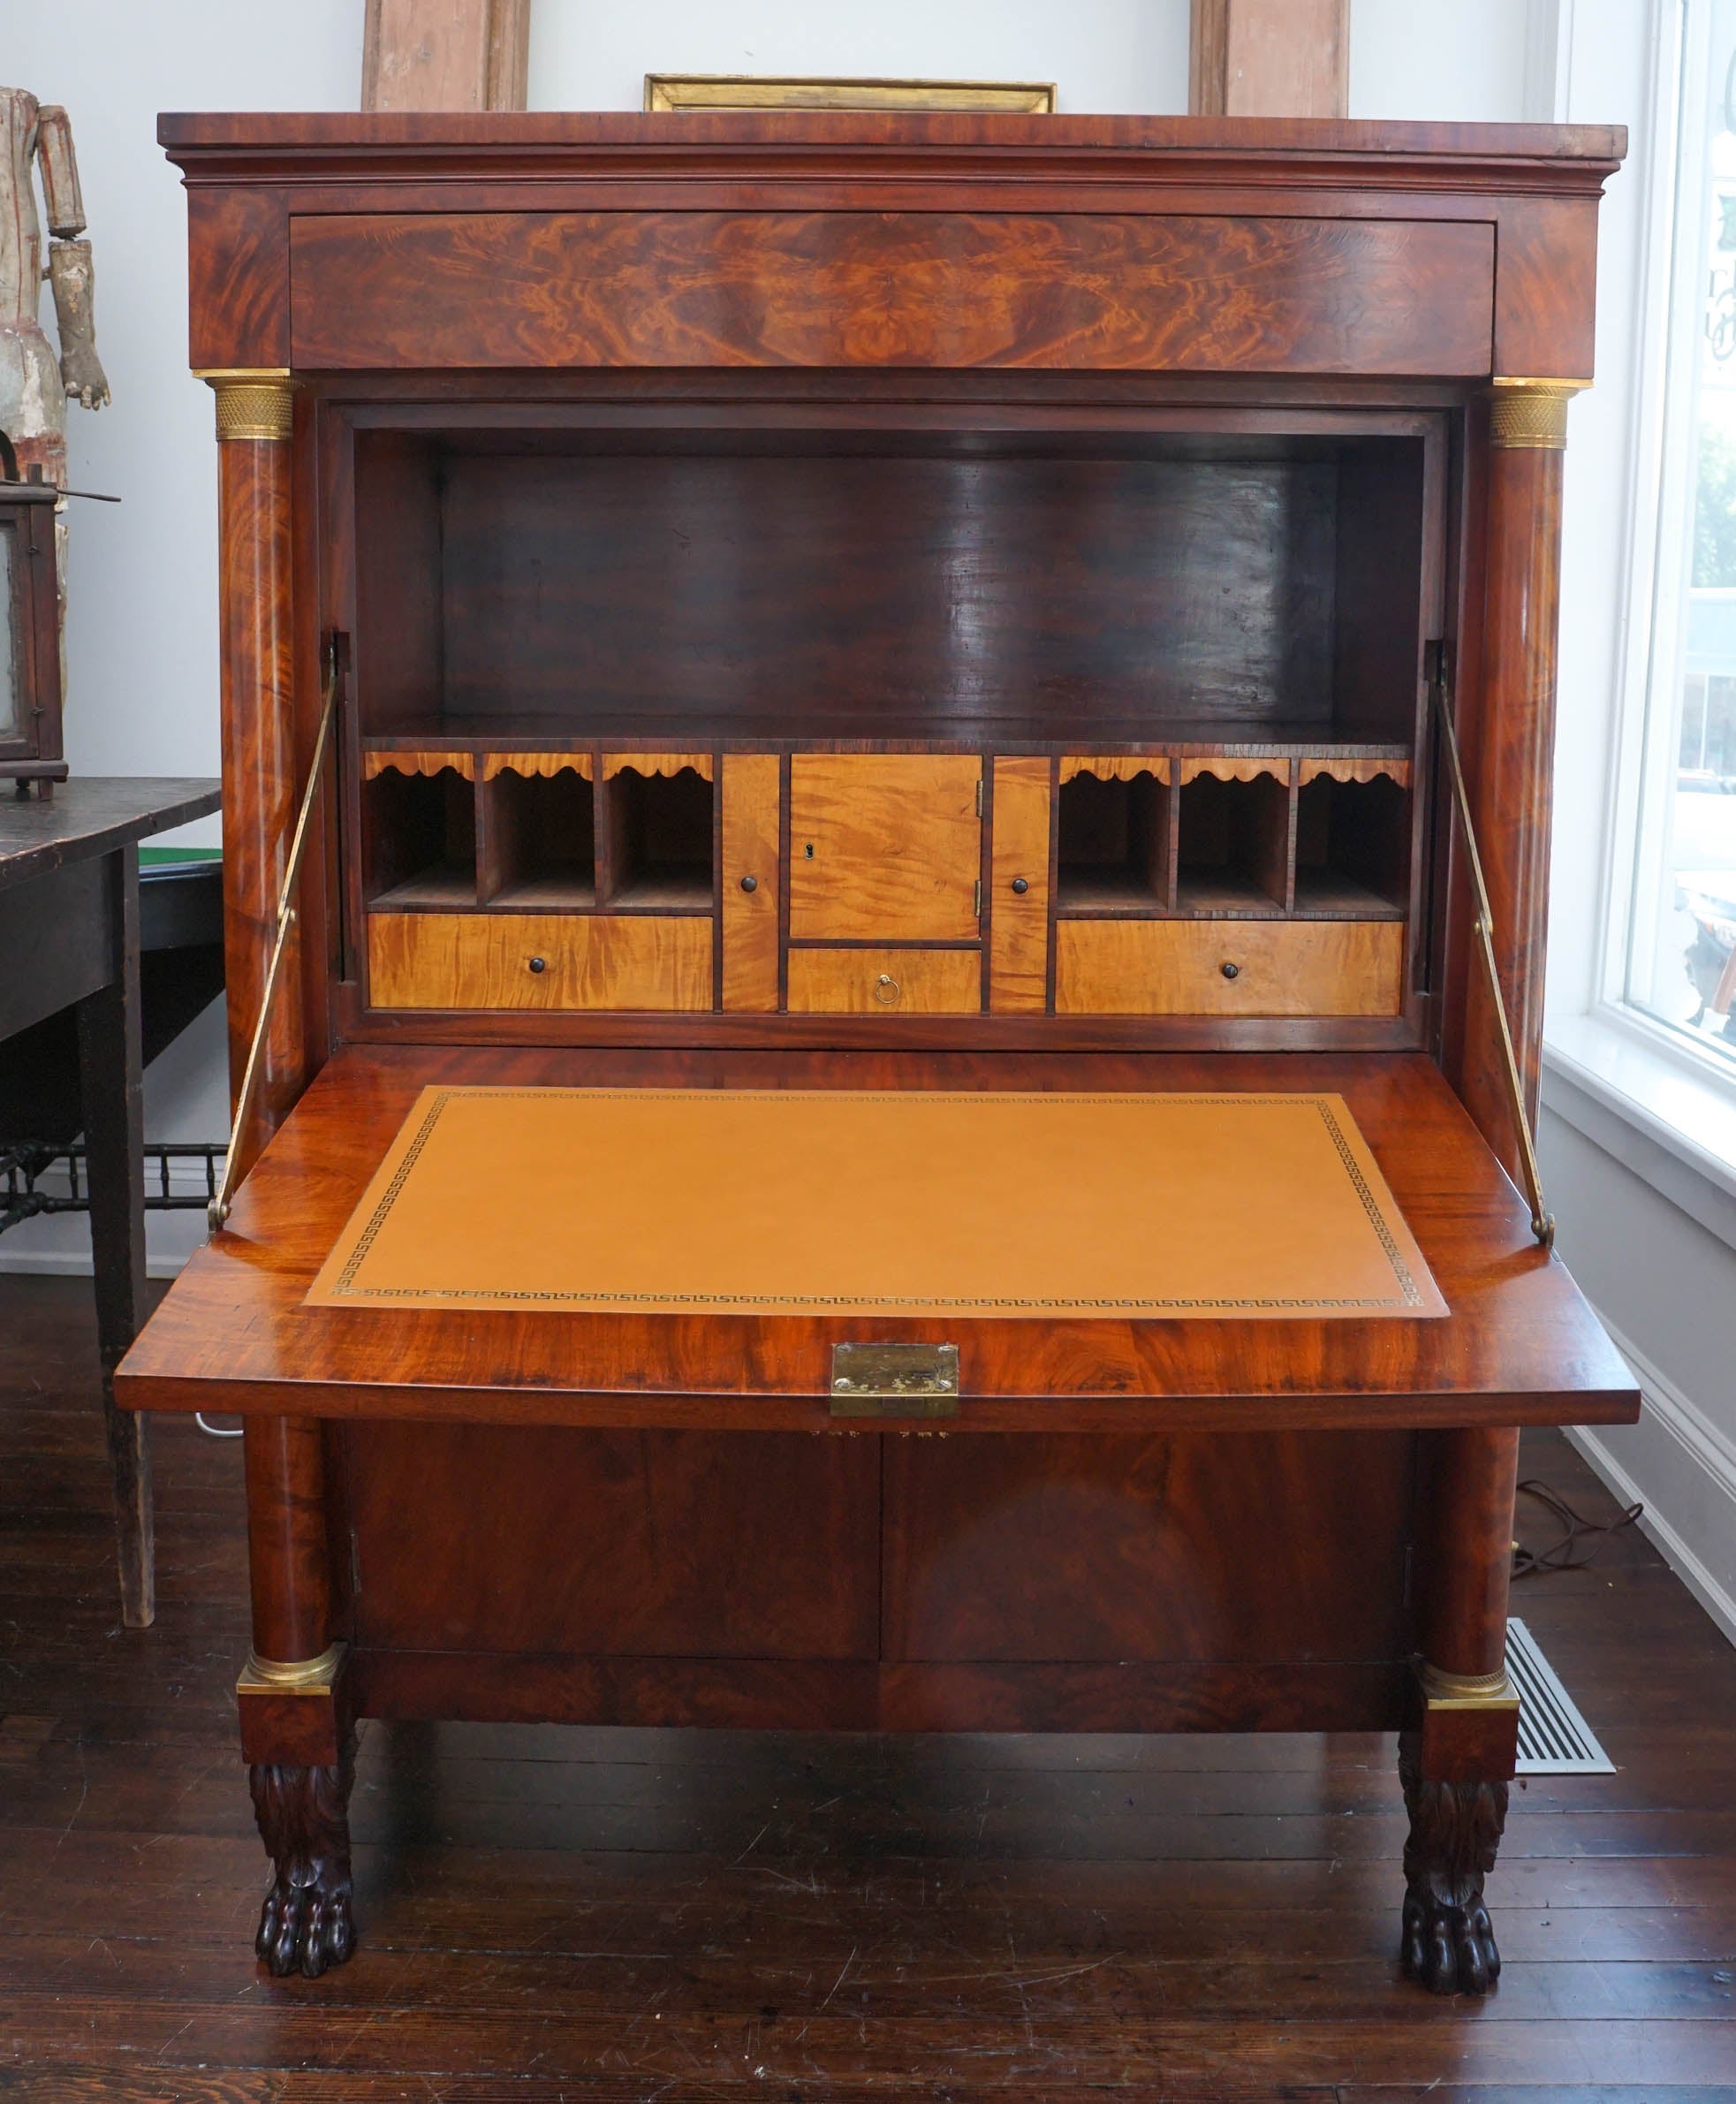 Beautifully bookmatched mahogany veneers and satinwood veneered interior drawers. Imported original French ormolu. Veneered columns in the manner of Lannuier and paw feet in the manner of Phyfe.
Repairs to mahogany top; new Greek key motif leather